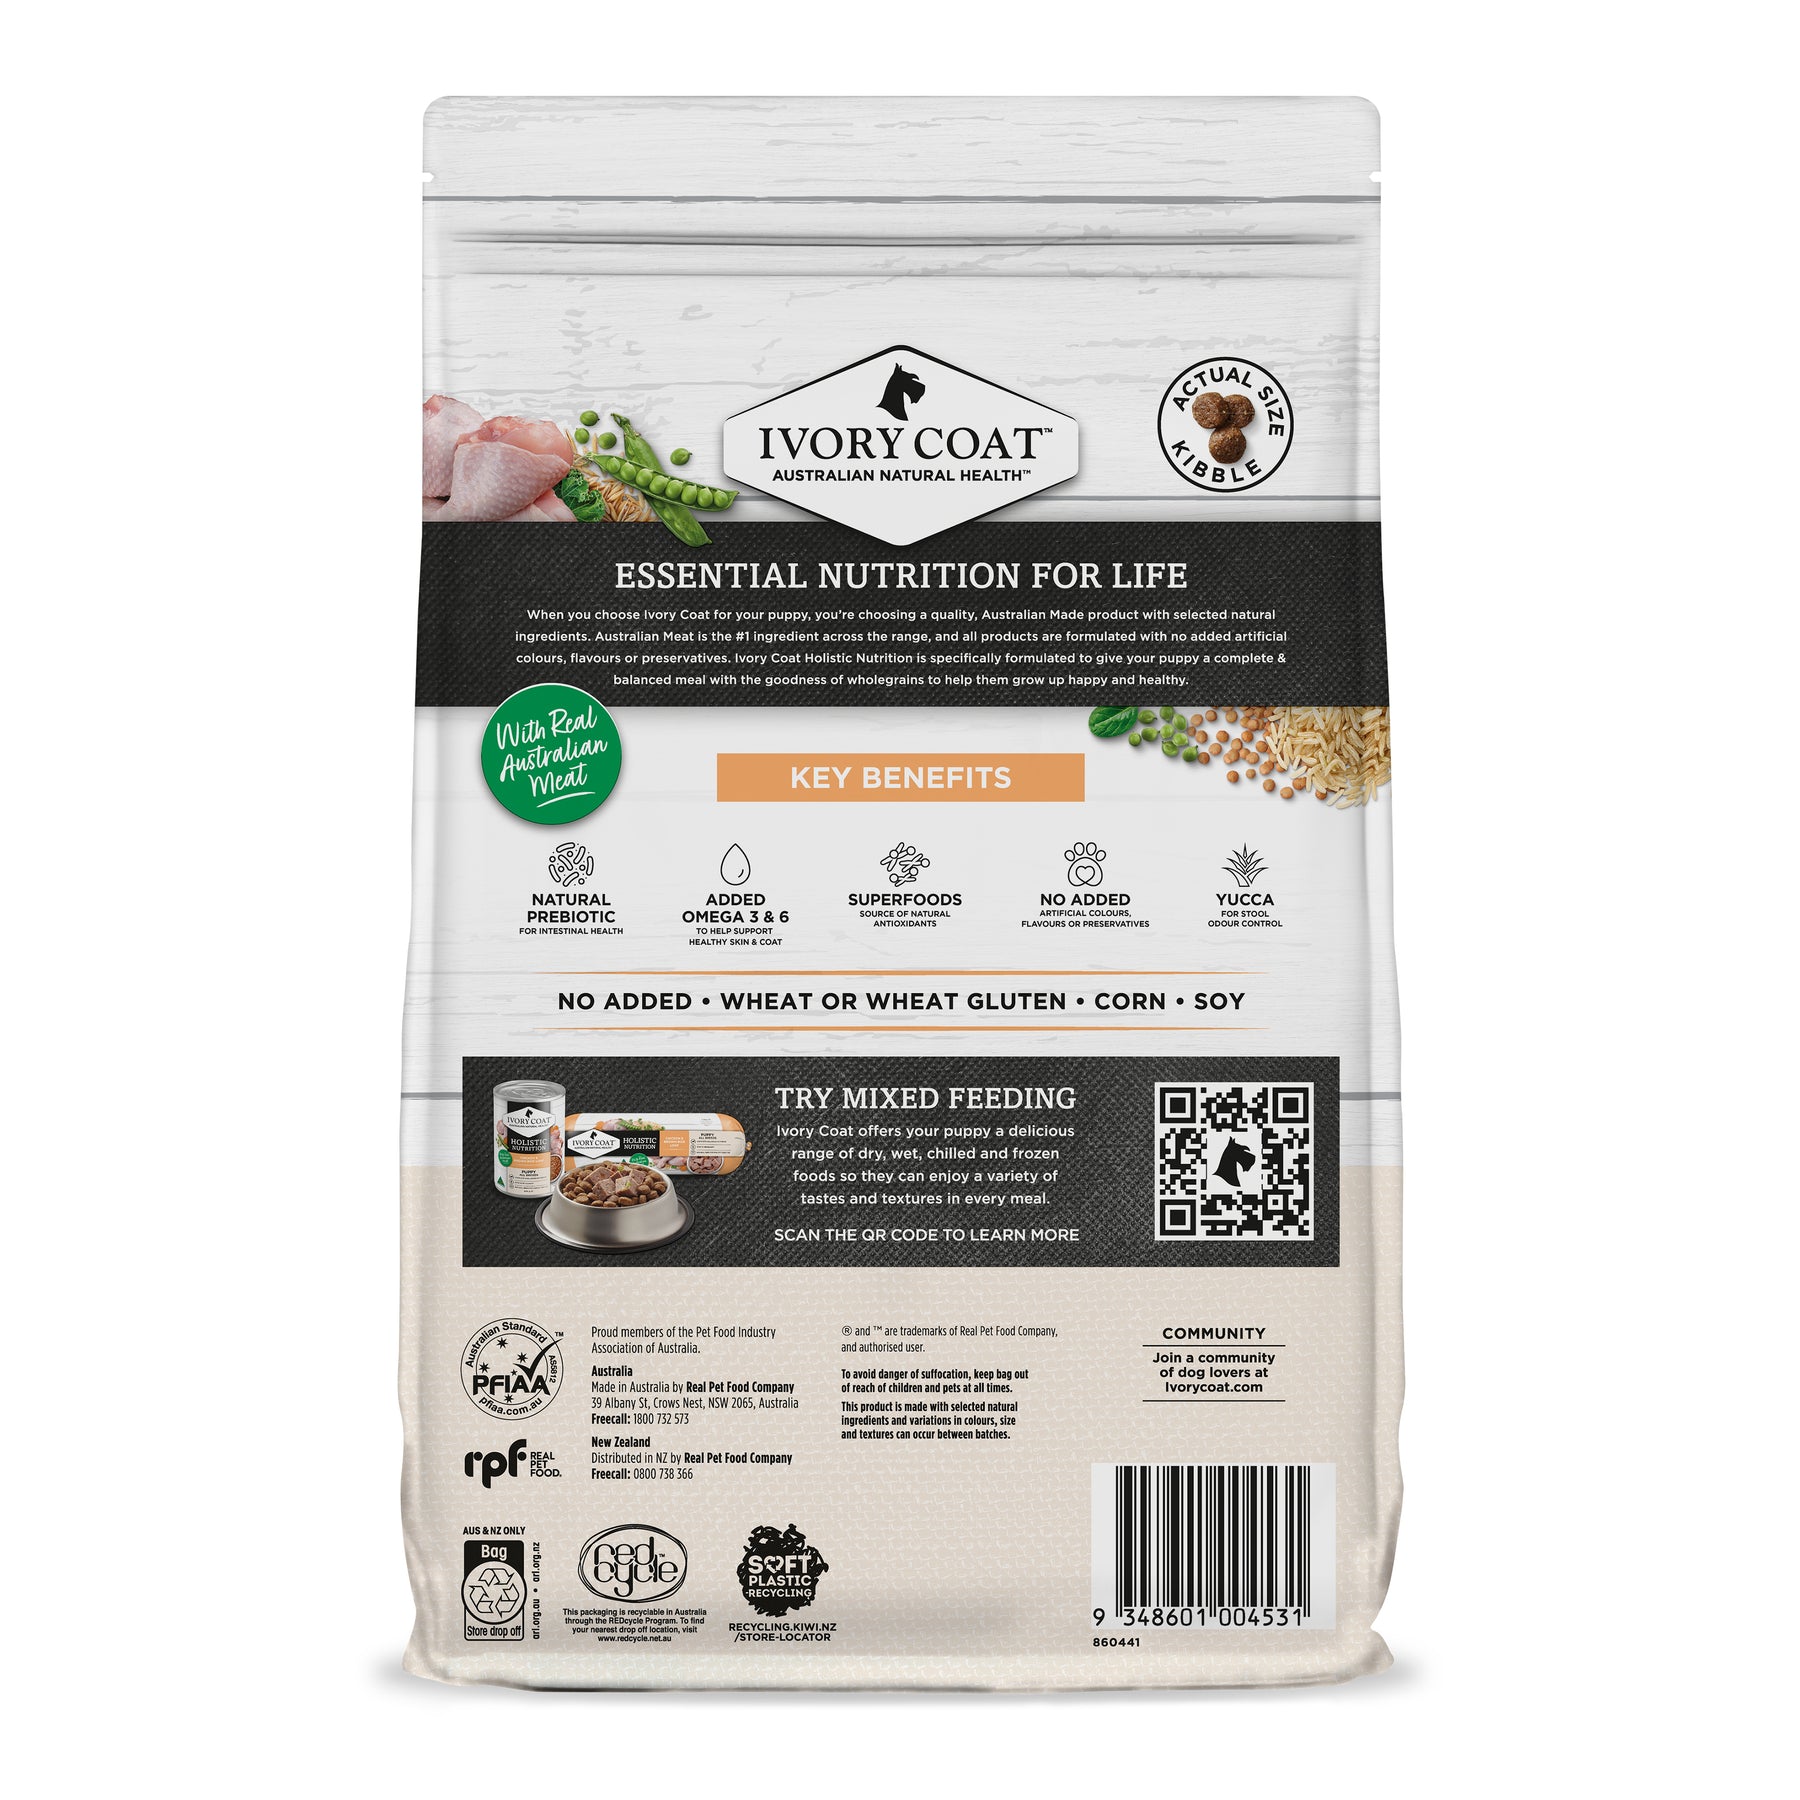 Holistic Nutrition Puppy All Breeds Dry Dog Food Chicken & Brown Rice